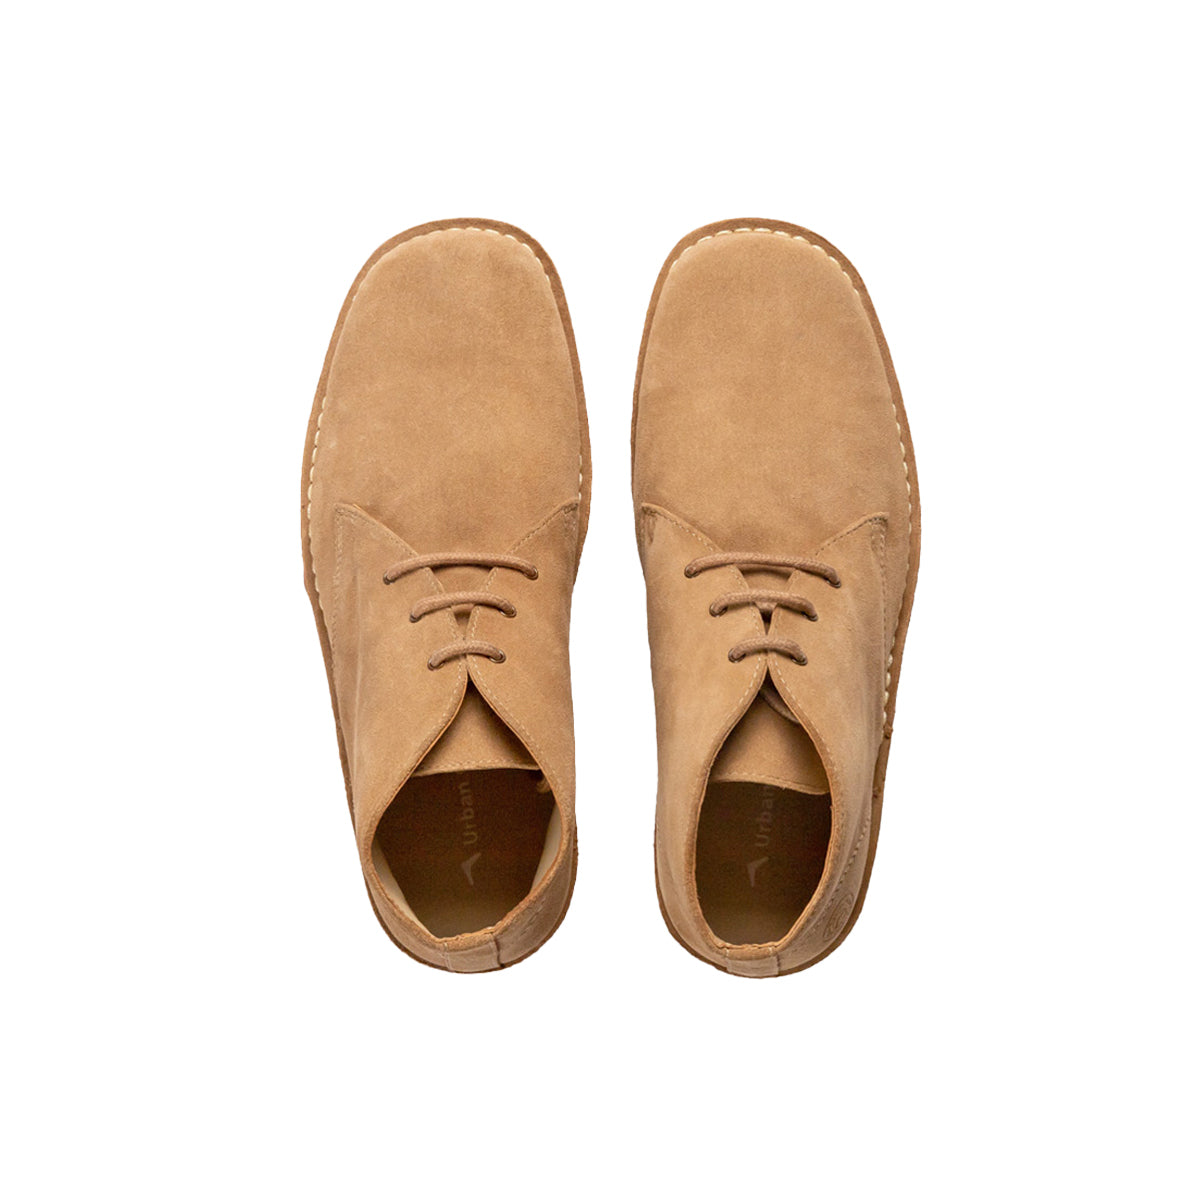 Men Suede  Leather Chukka  Boots ǀ STEVE 1357